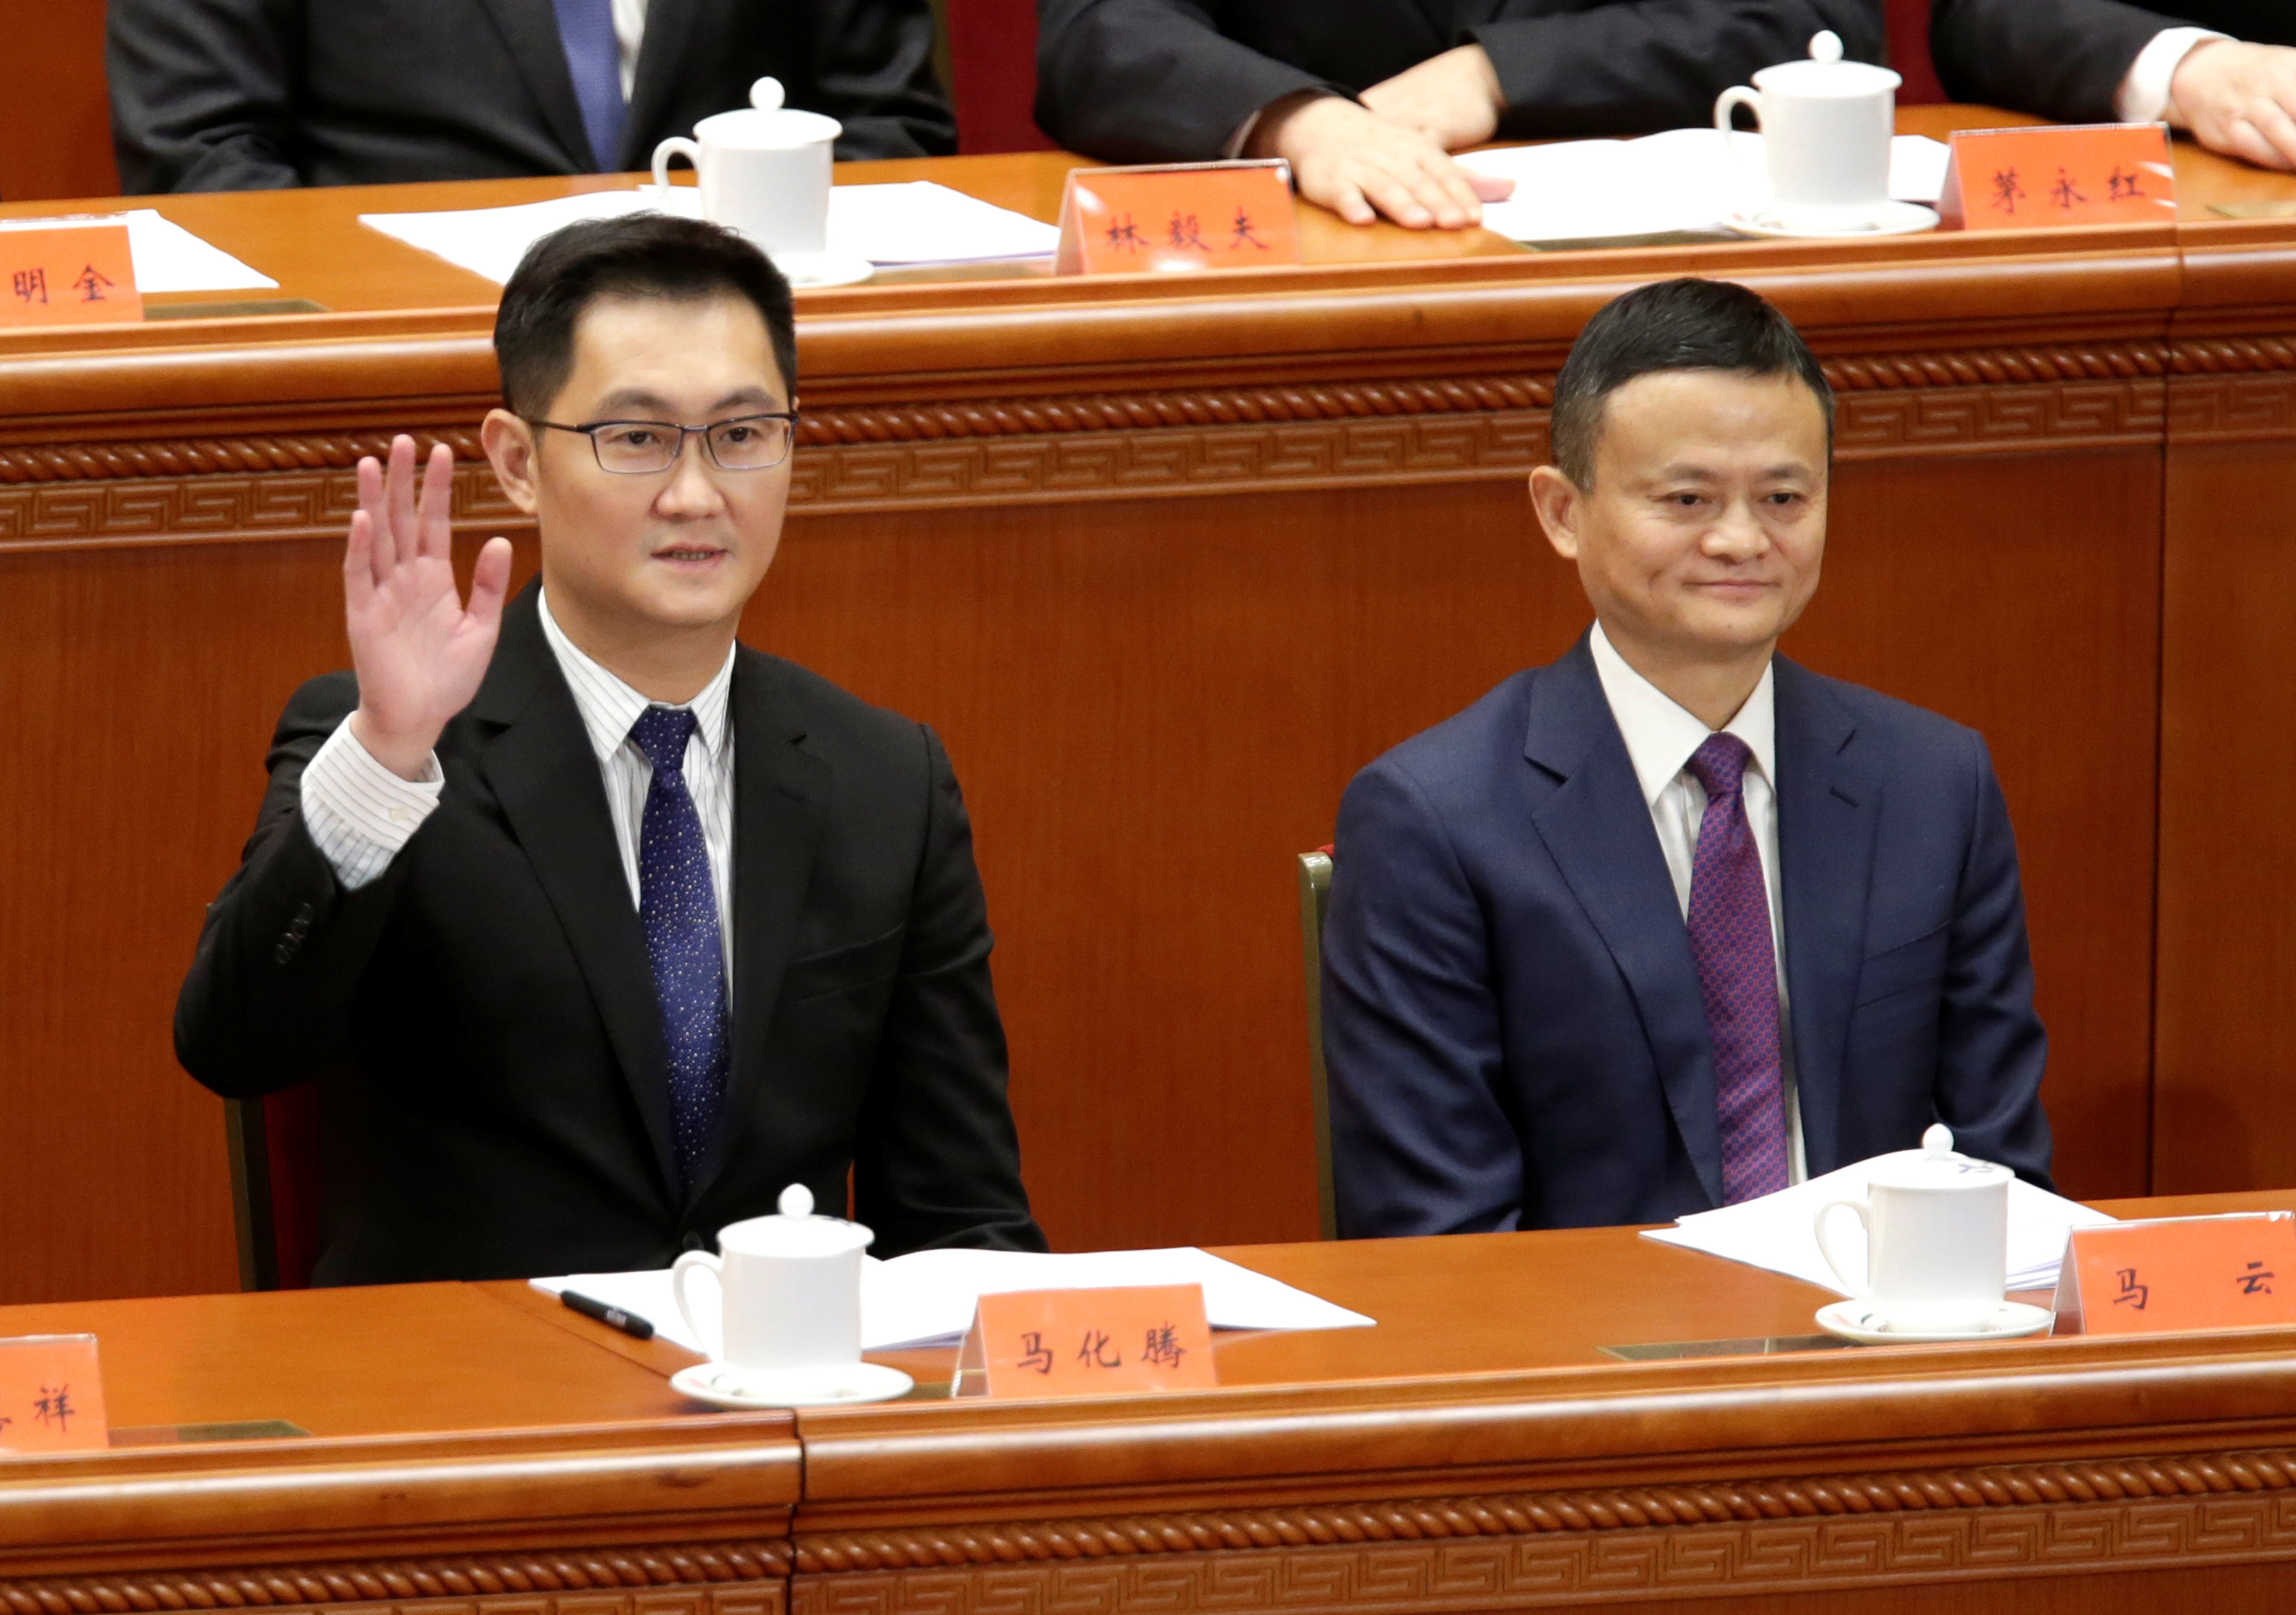 Tencent's Chief Executive Officer Pony Ma waves next to Alibaba's Executive Chairman Jack Ma at an event marking the 40th anniversary of China's reform in Beijing